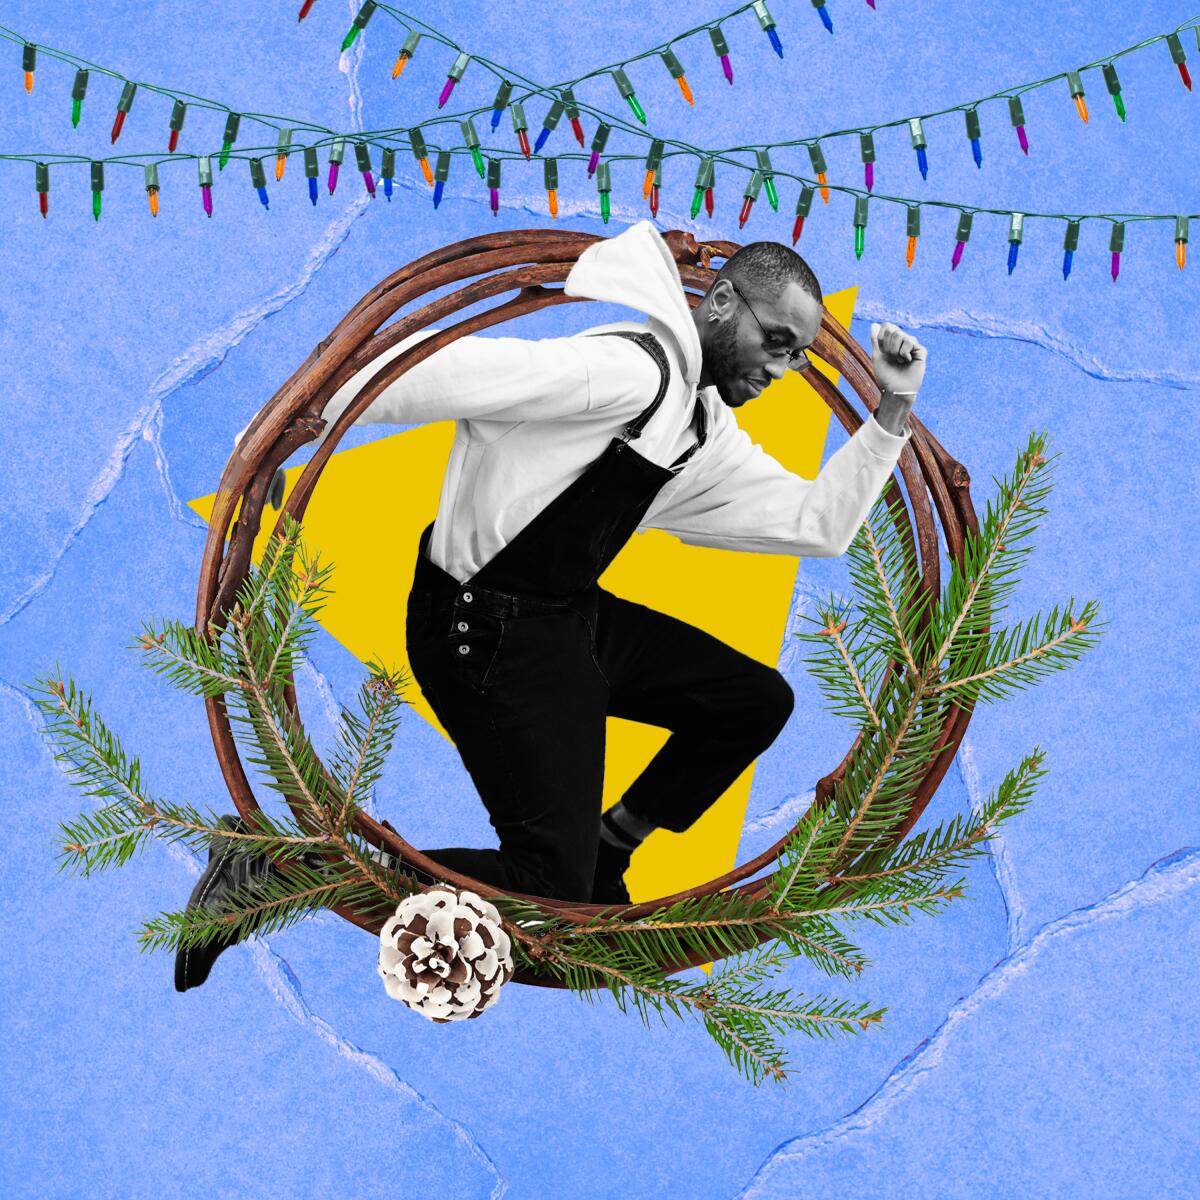 A man leaping through a wreath with lights splayed on top.